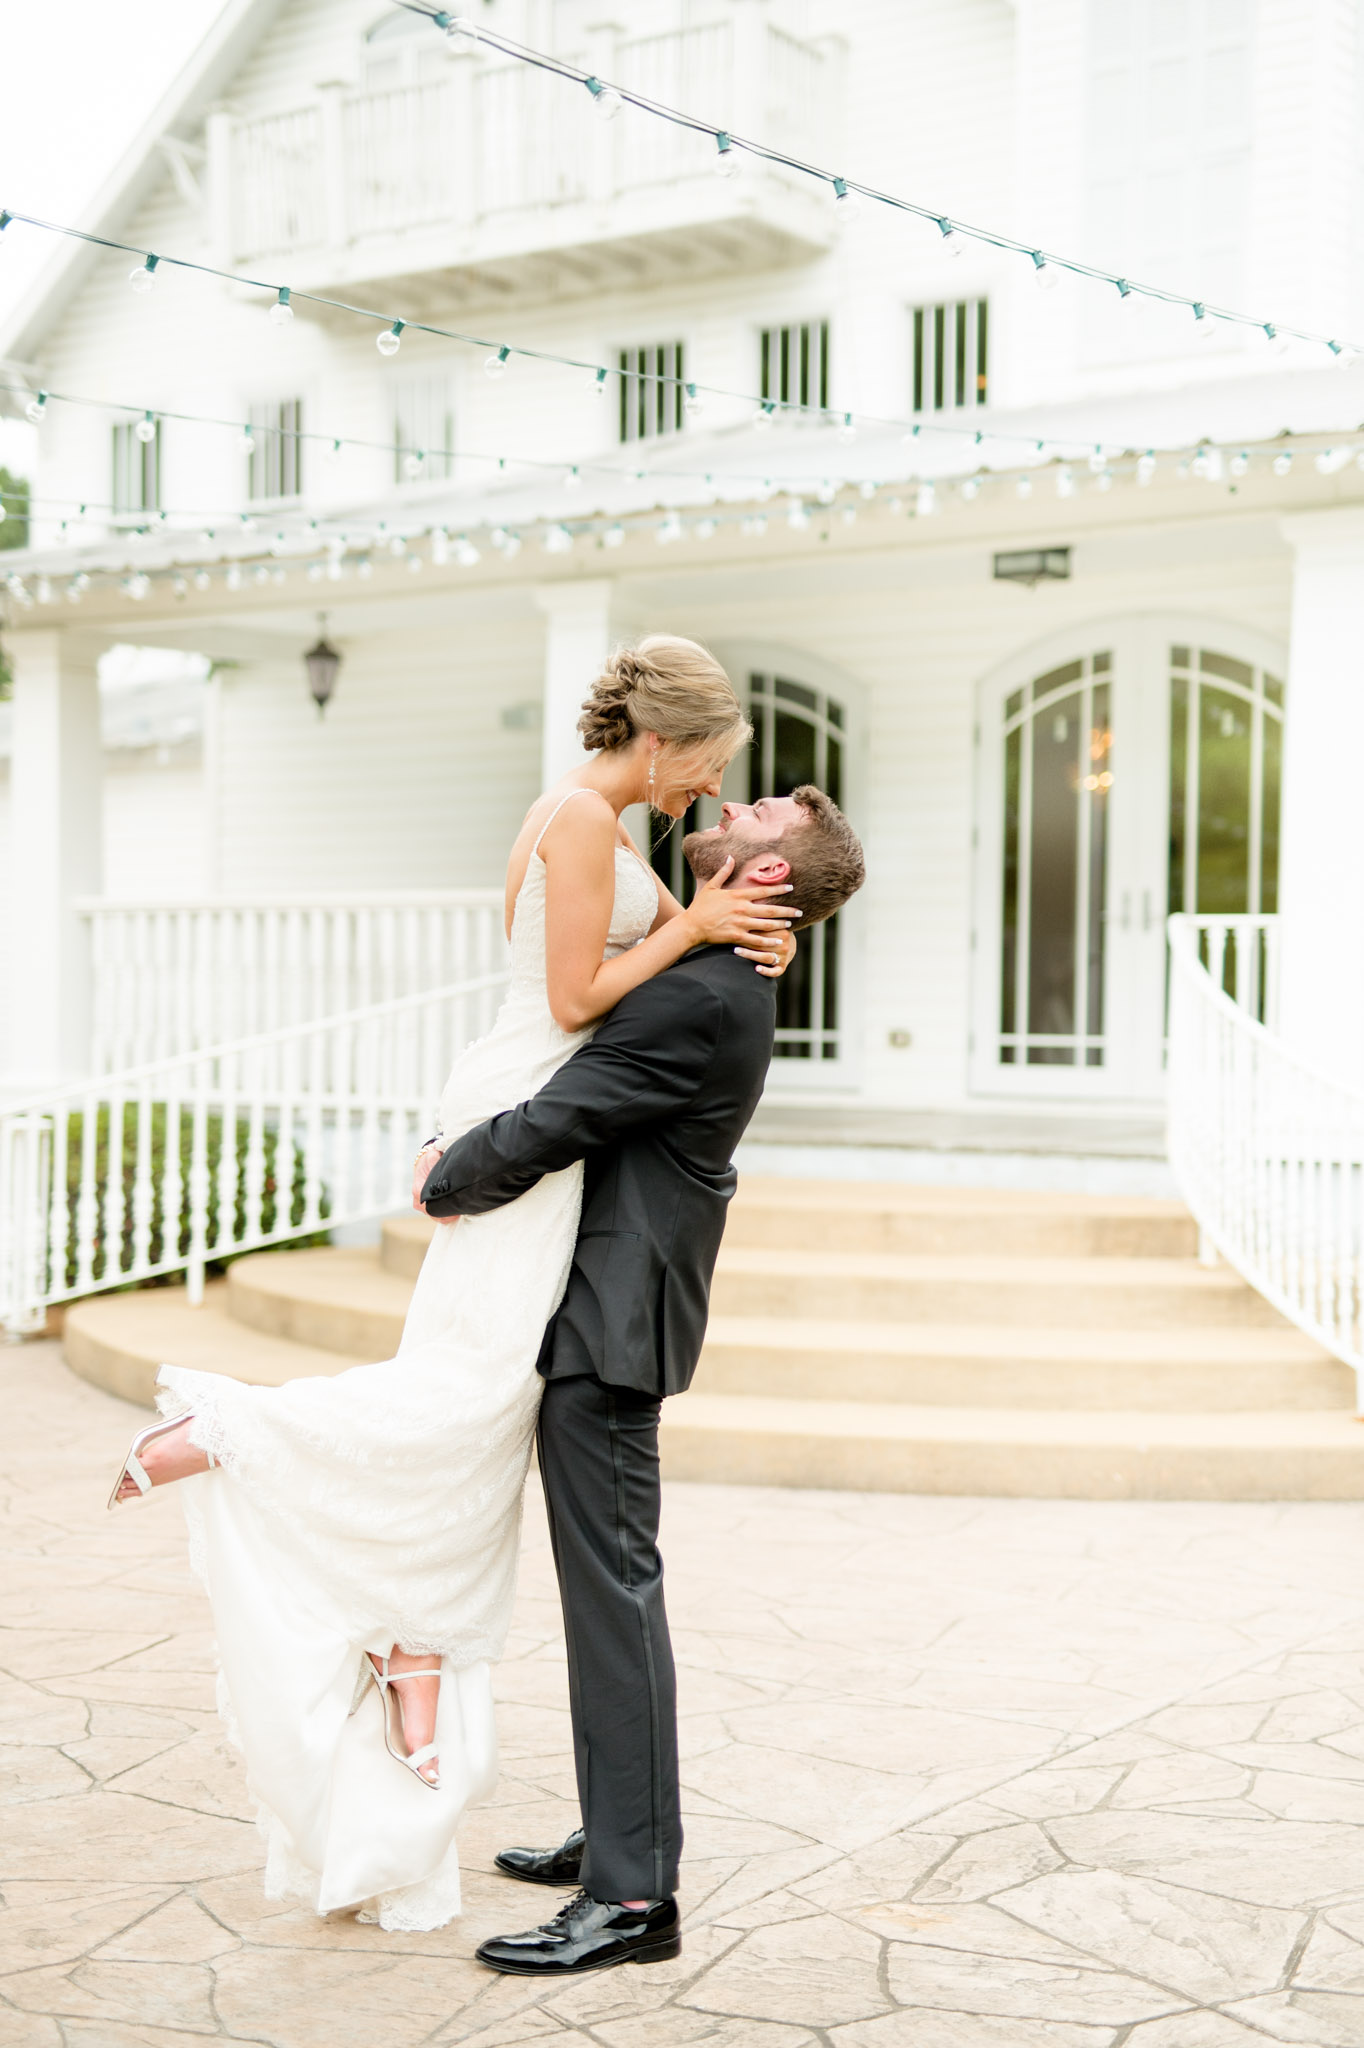 Groom lifts bride for kiss.